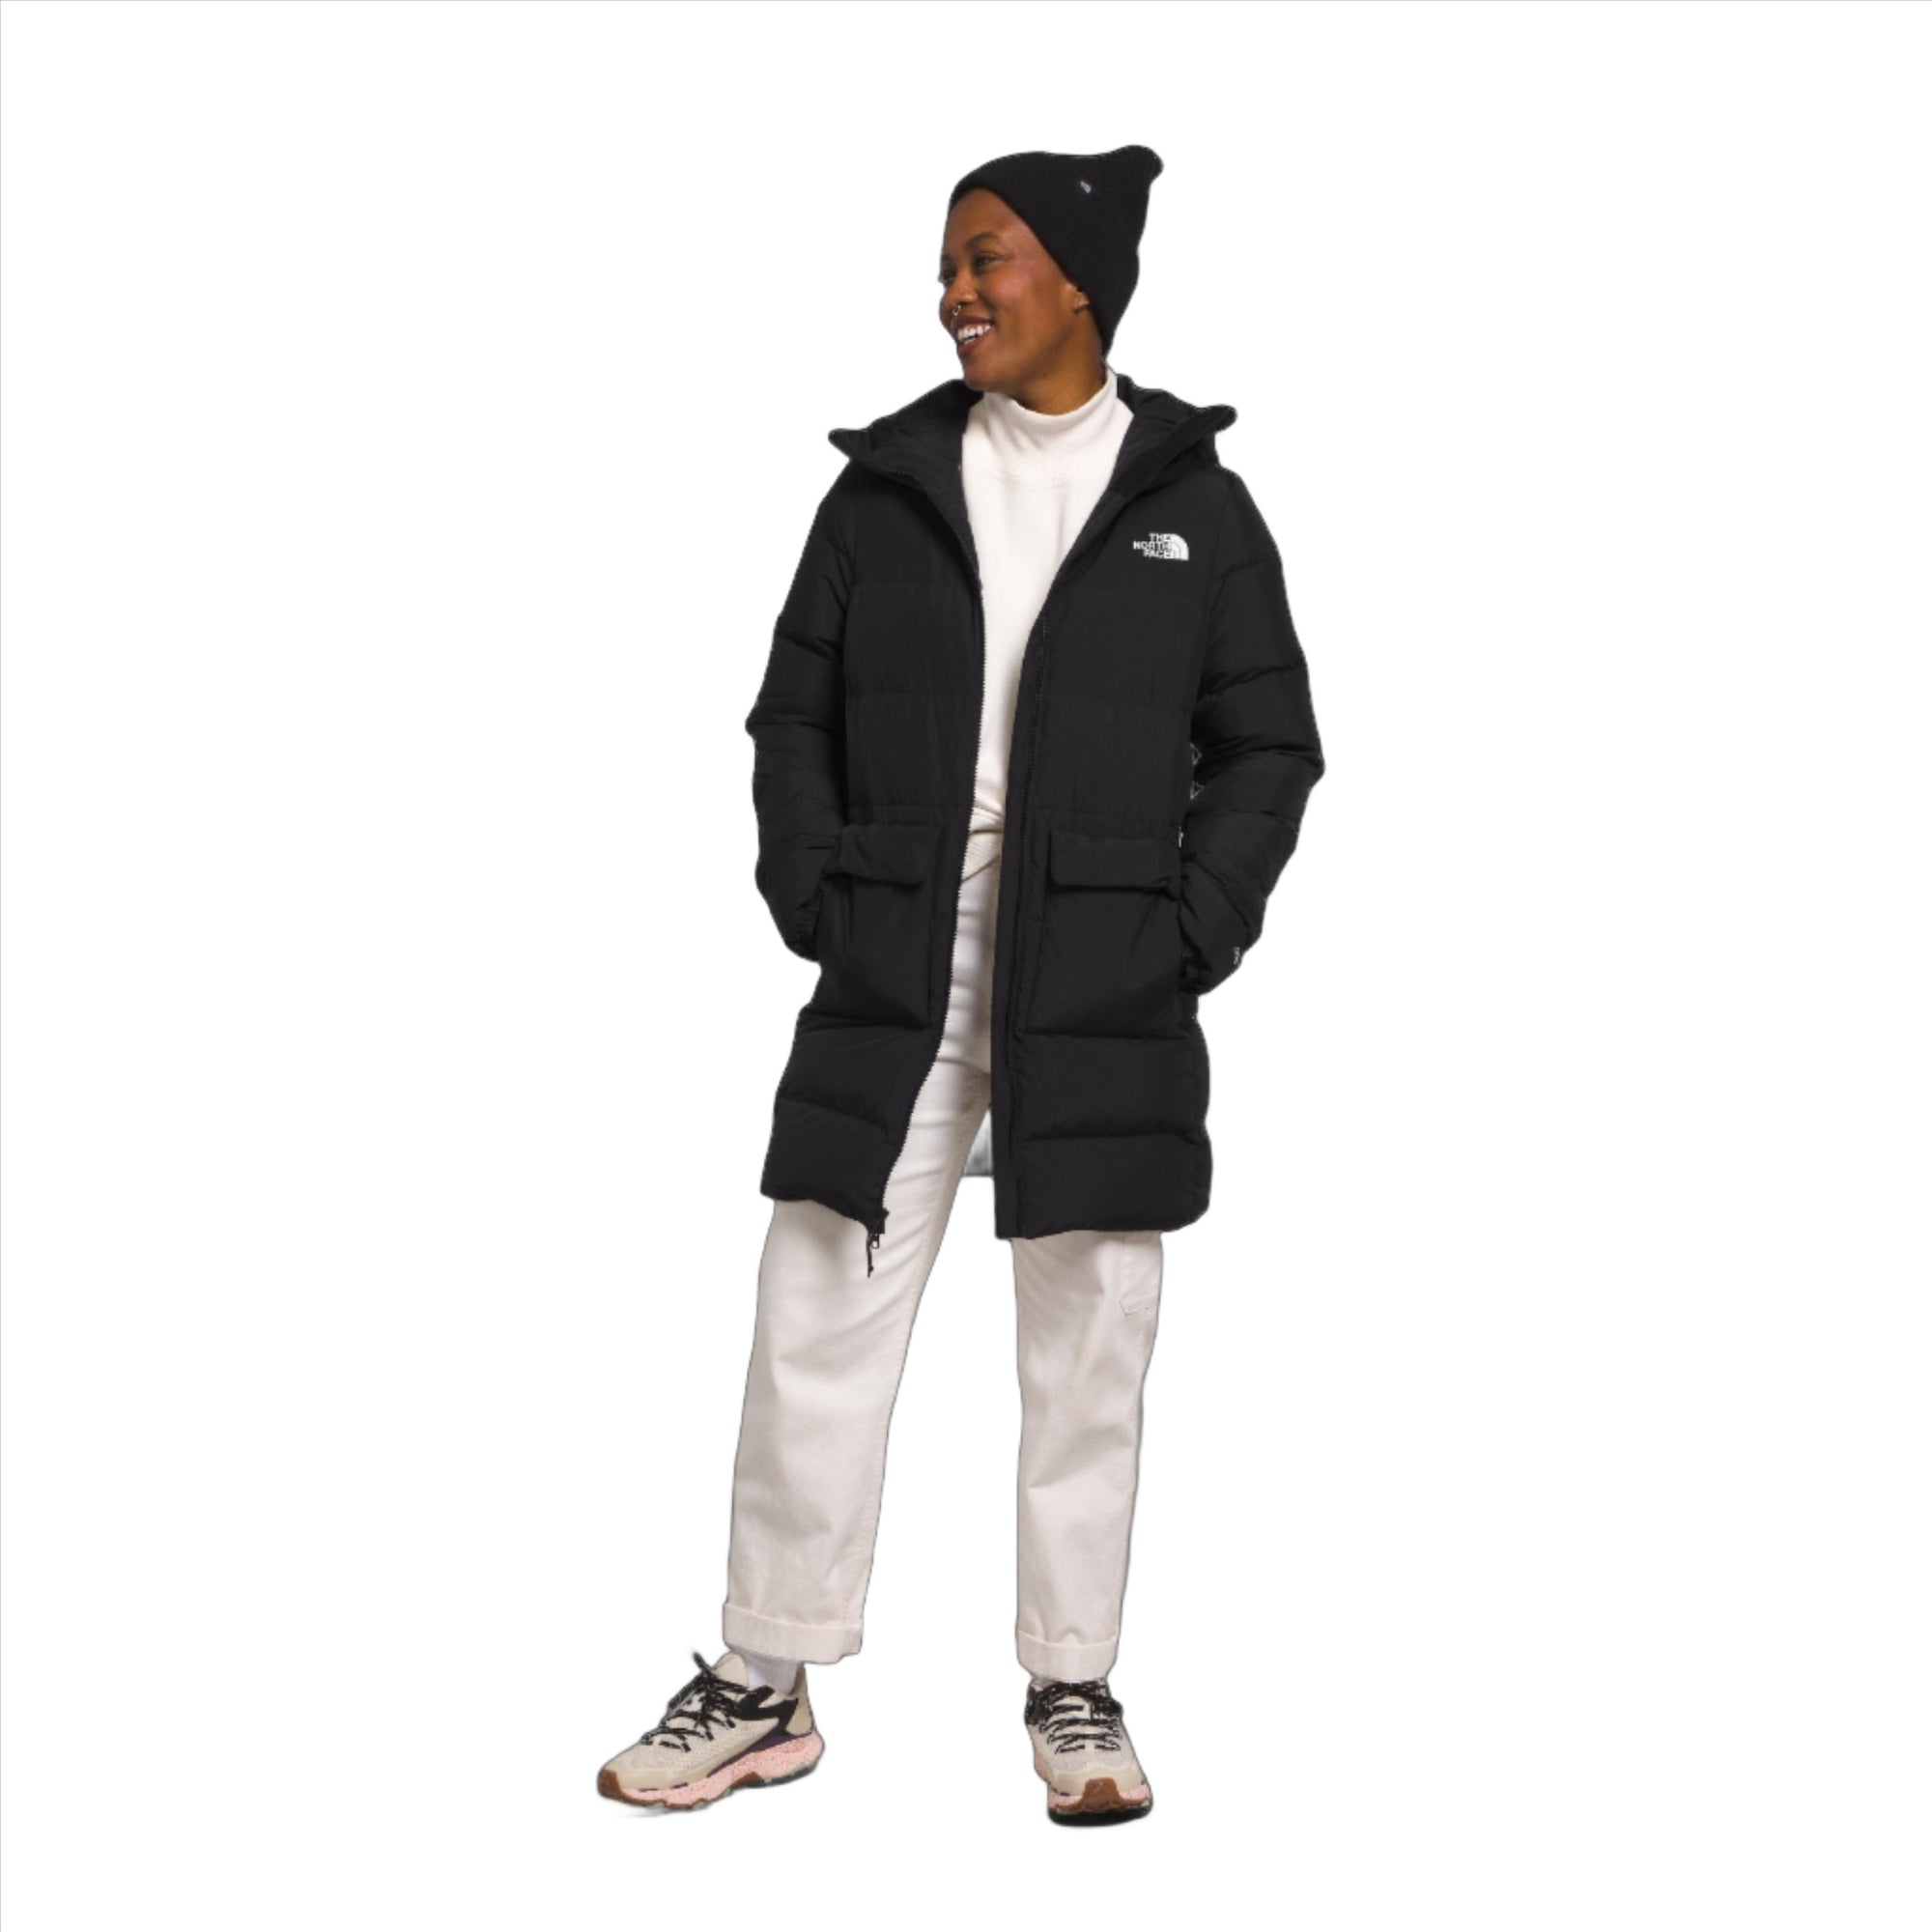 The North Face Women Gothan Parka black - model front - jacket closed